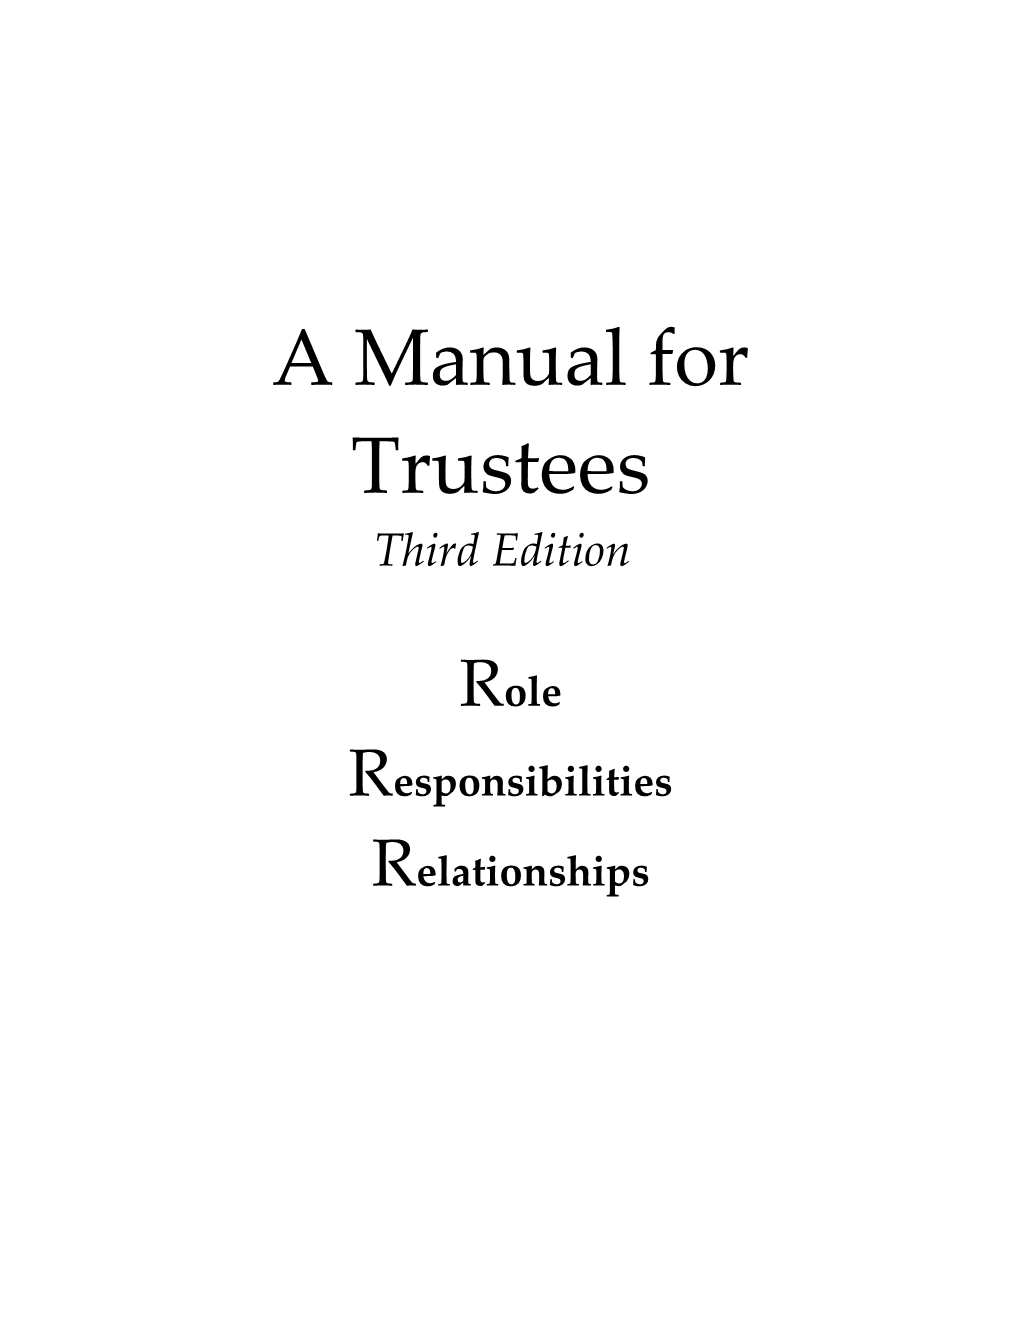 A Manual for Trustees